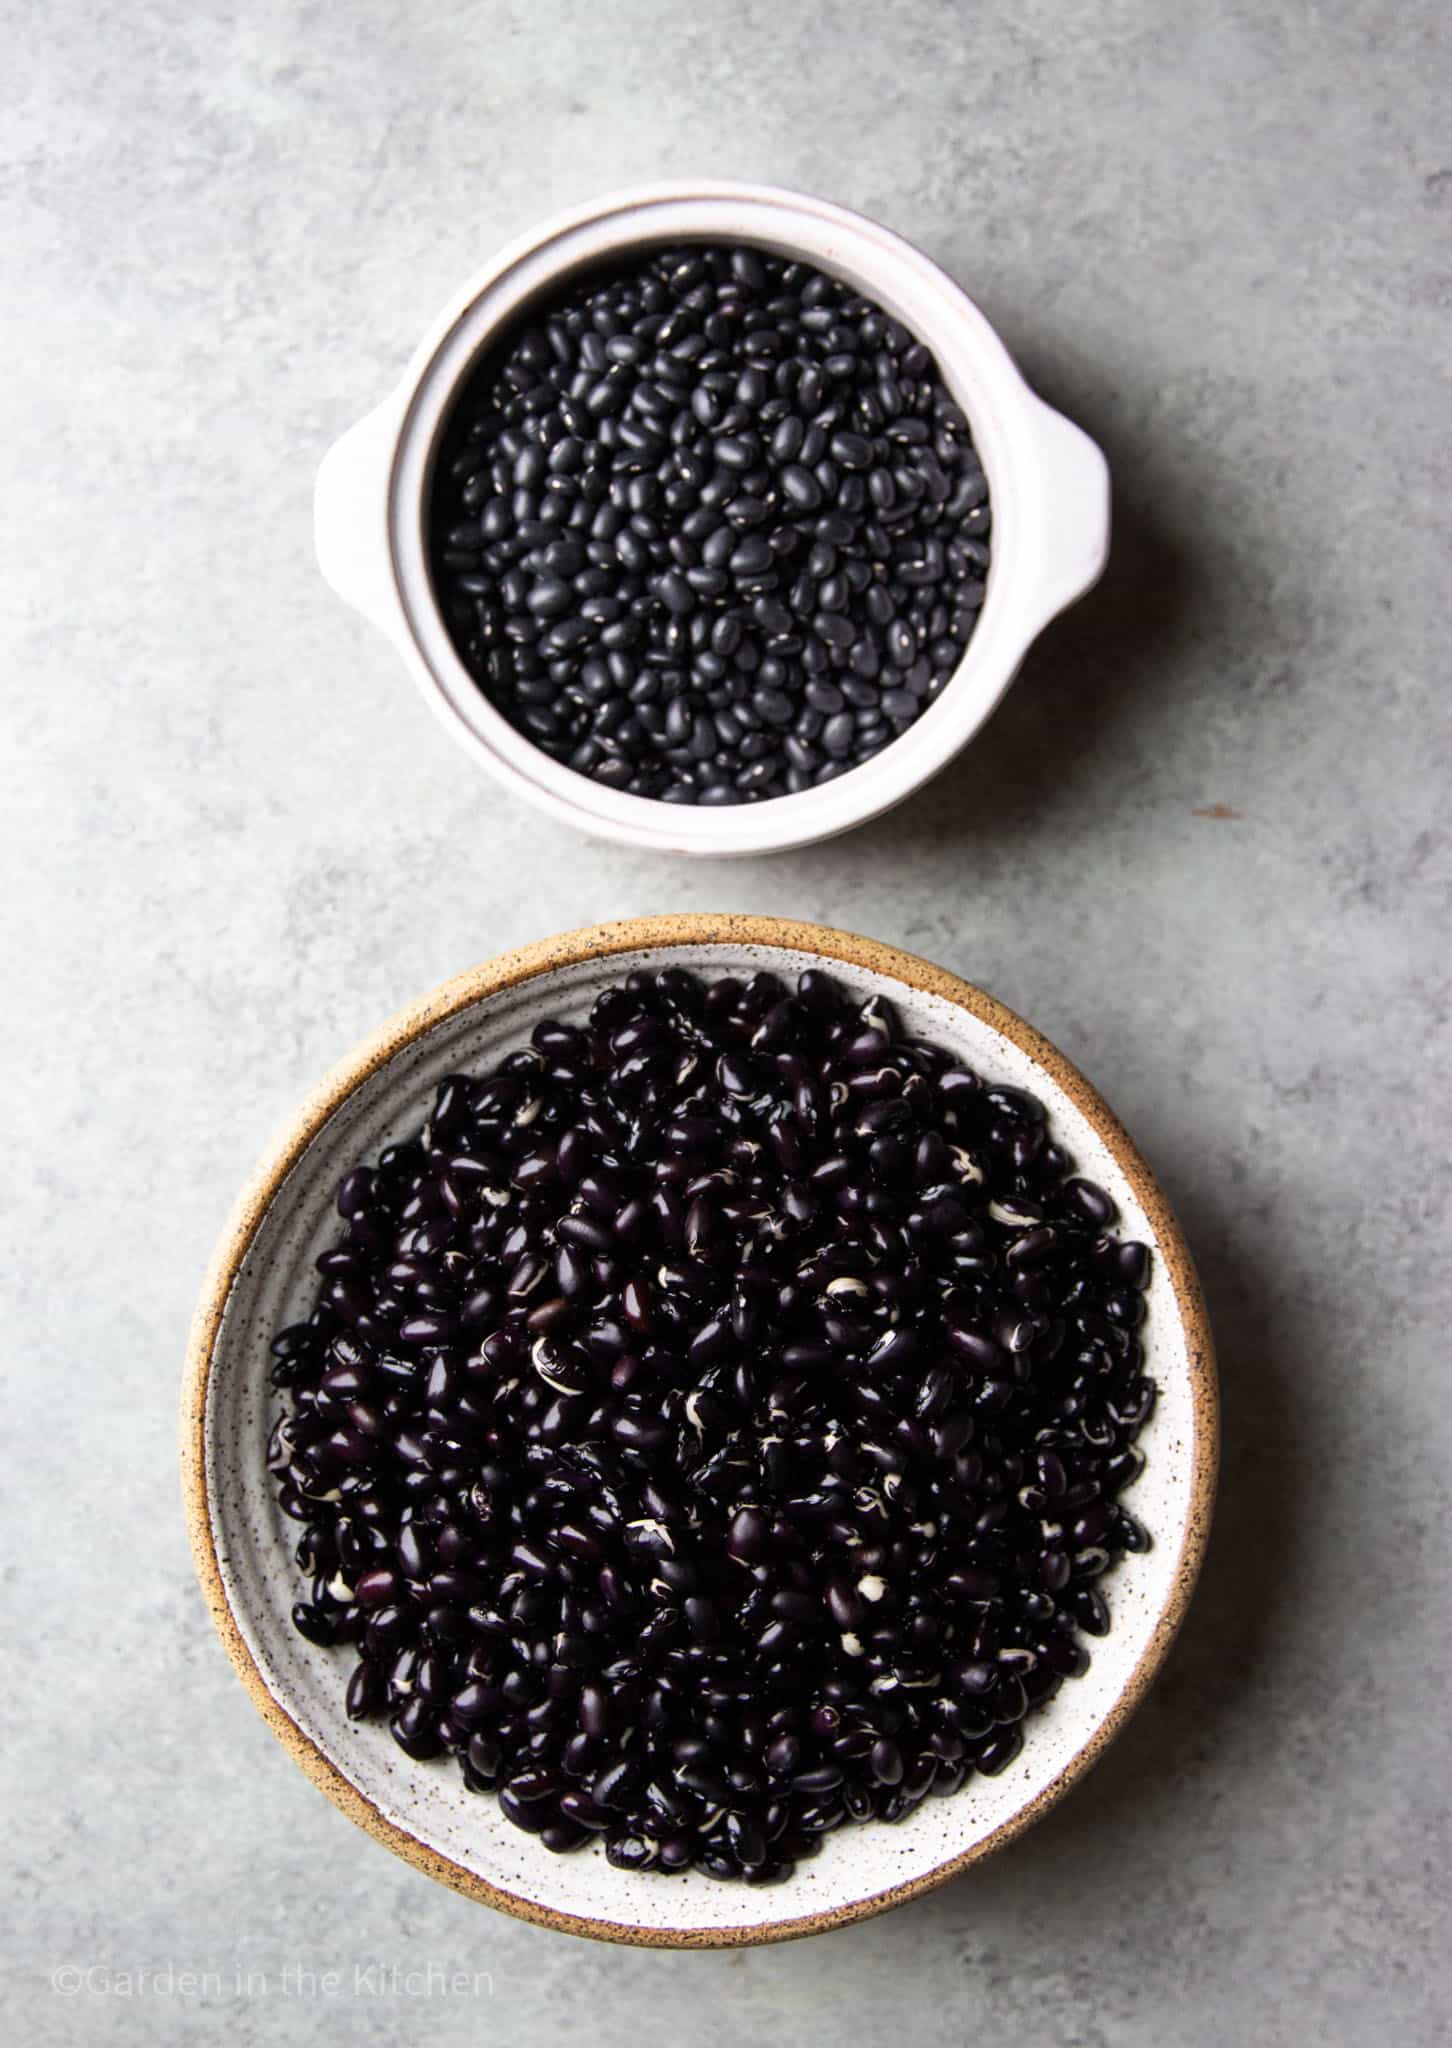 dried black beans in a white bowl next to a large bowl full of soaked black beans.